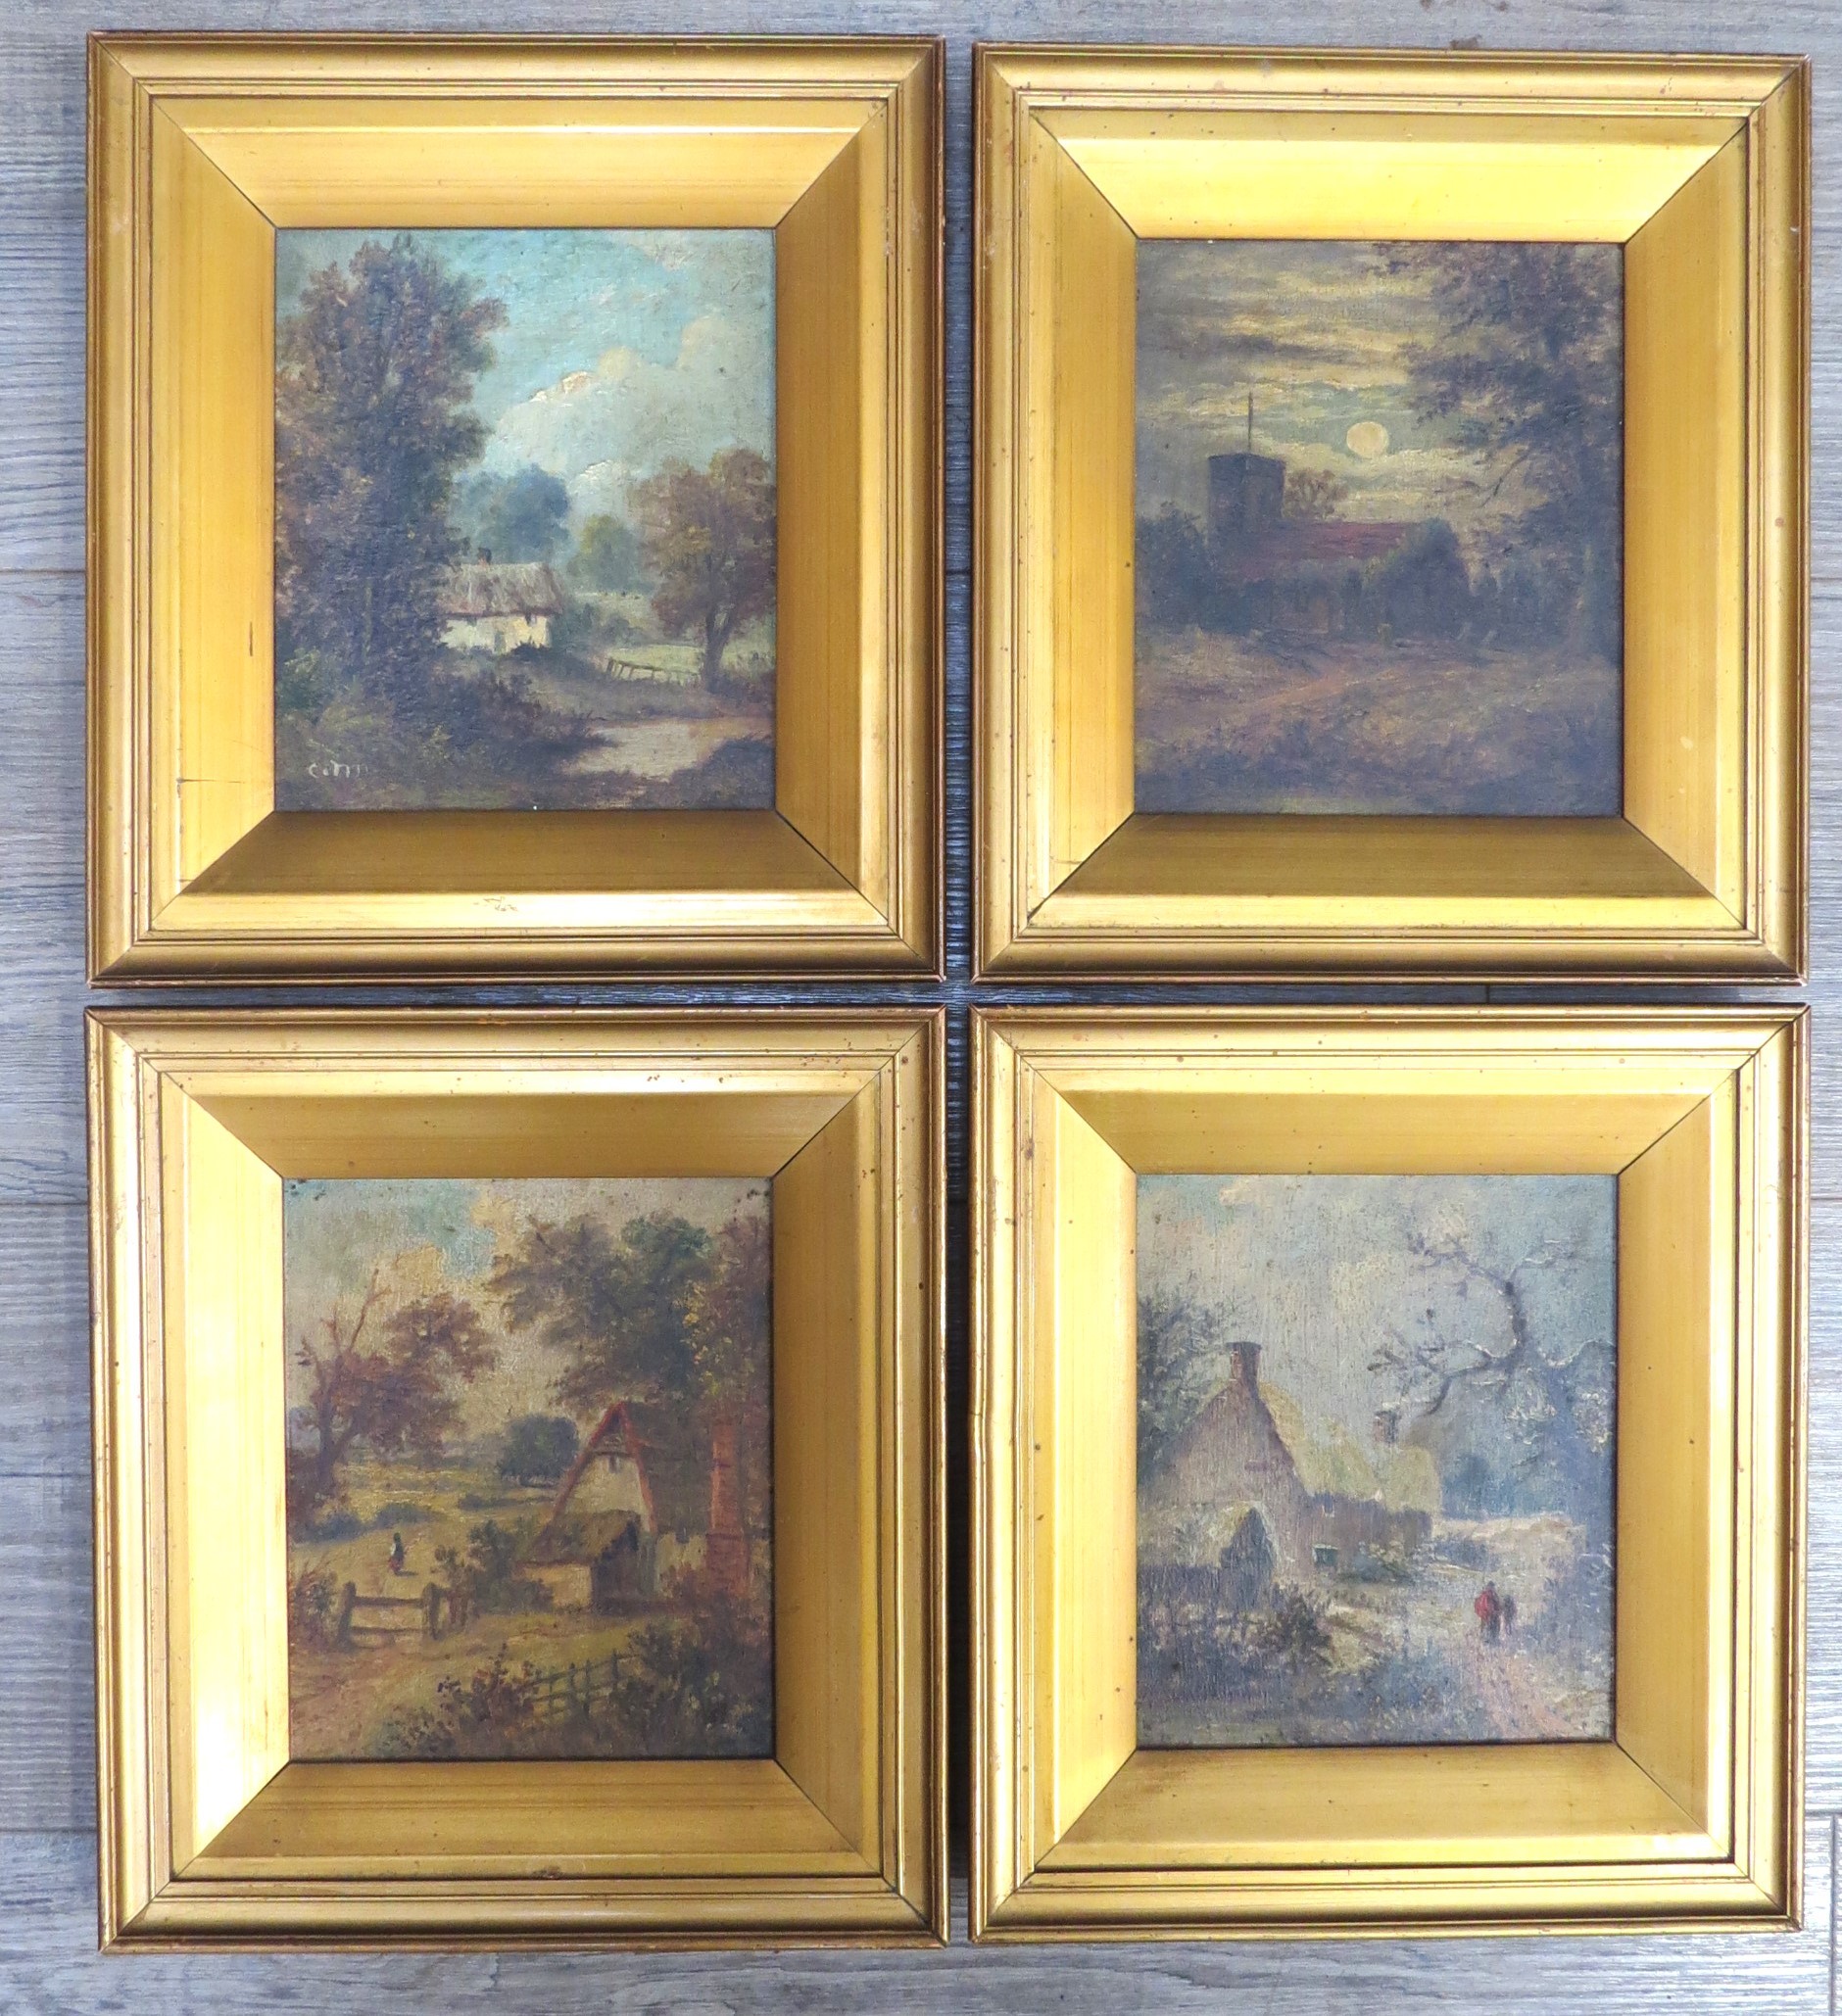 CHARLES MARK MASKELL (1846-1933) The Four Seasons - Four small oils on board, cottage and church - Image 2 of 8